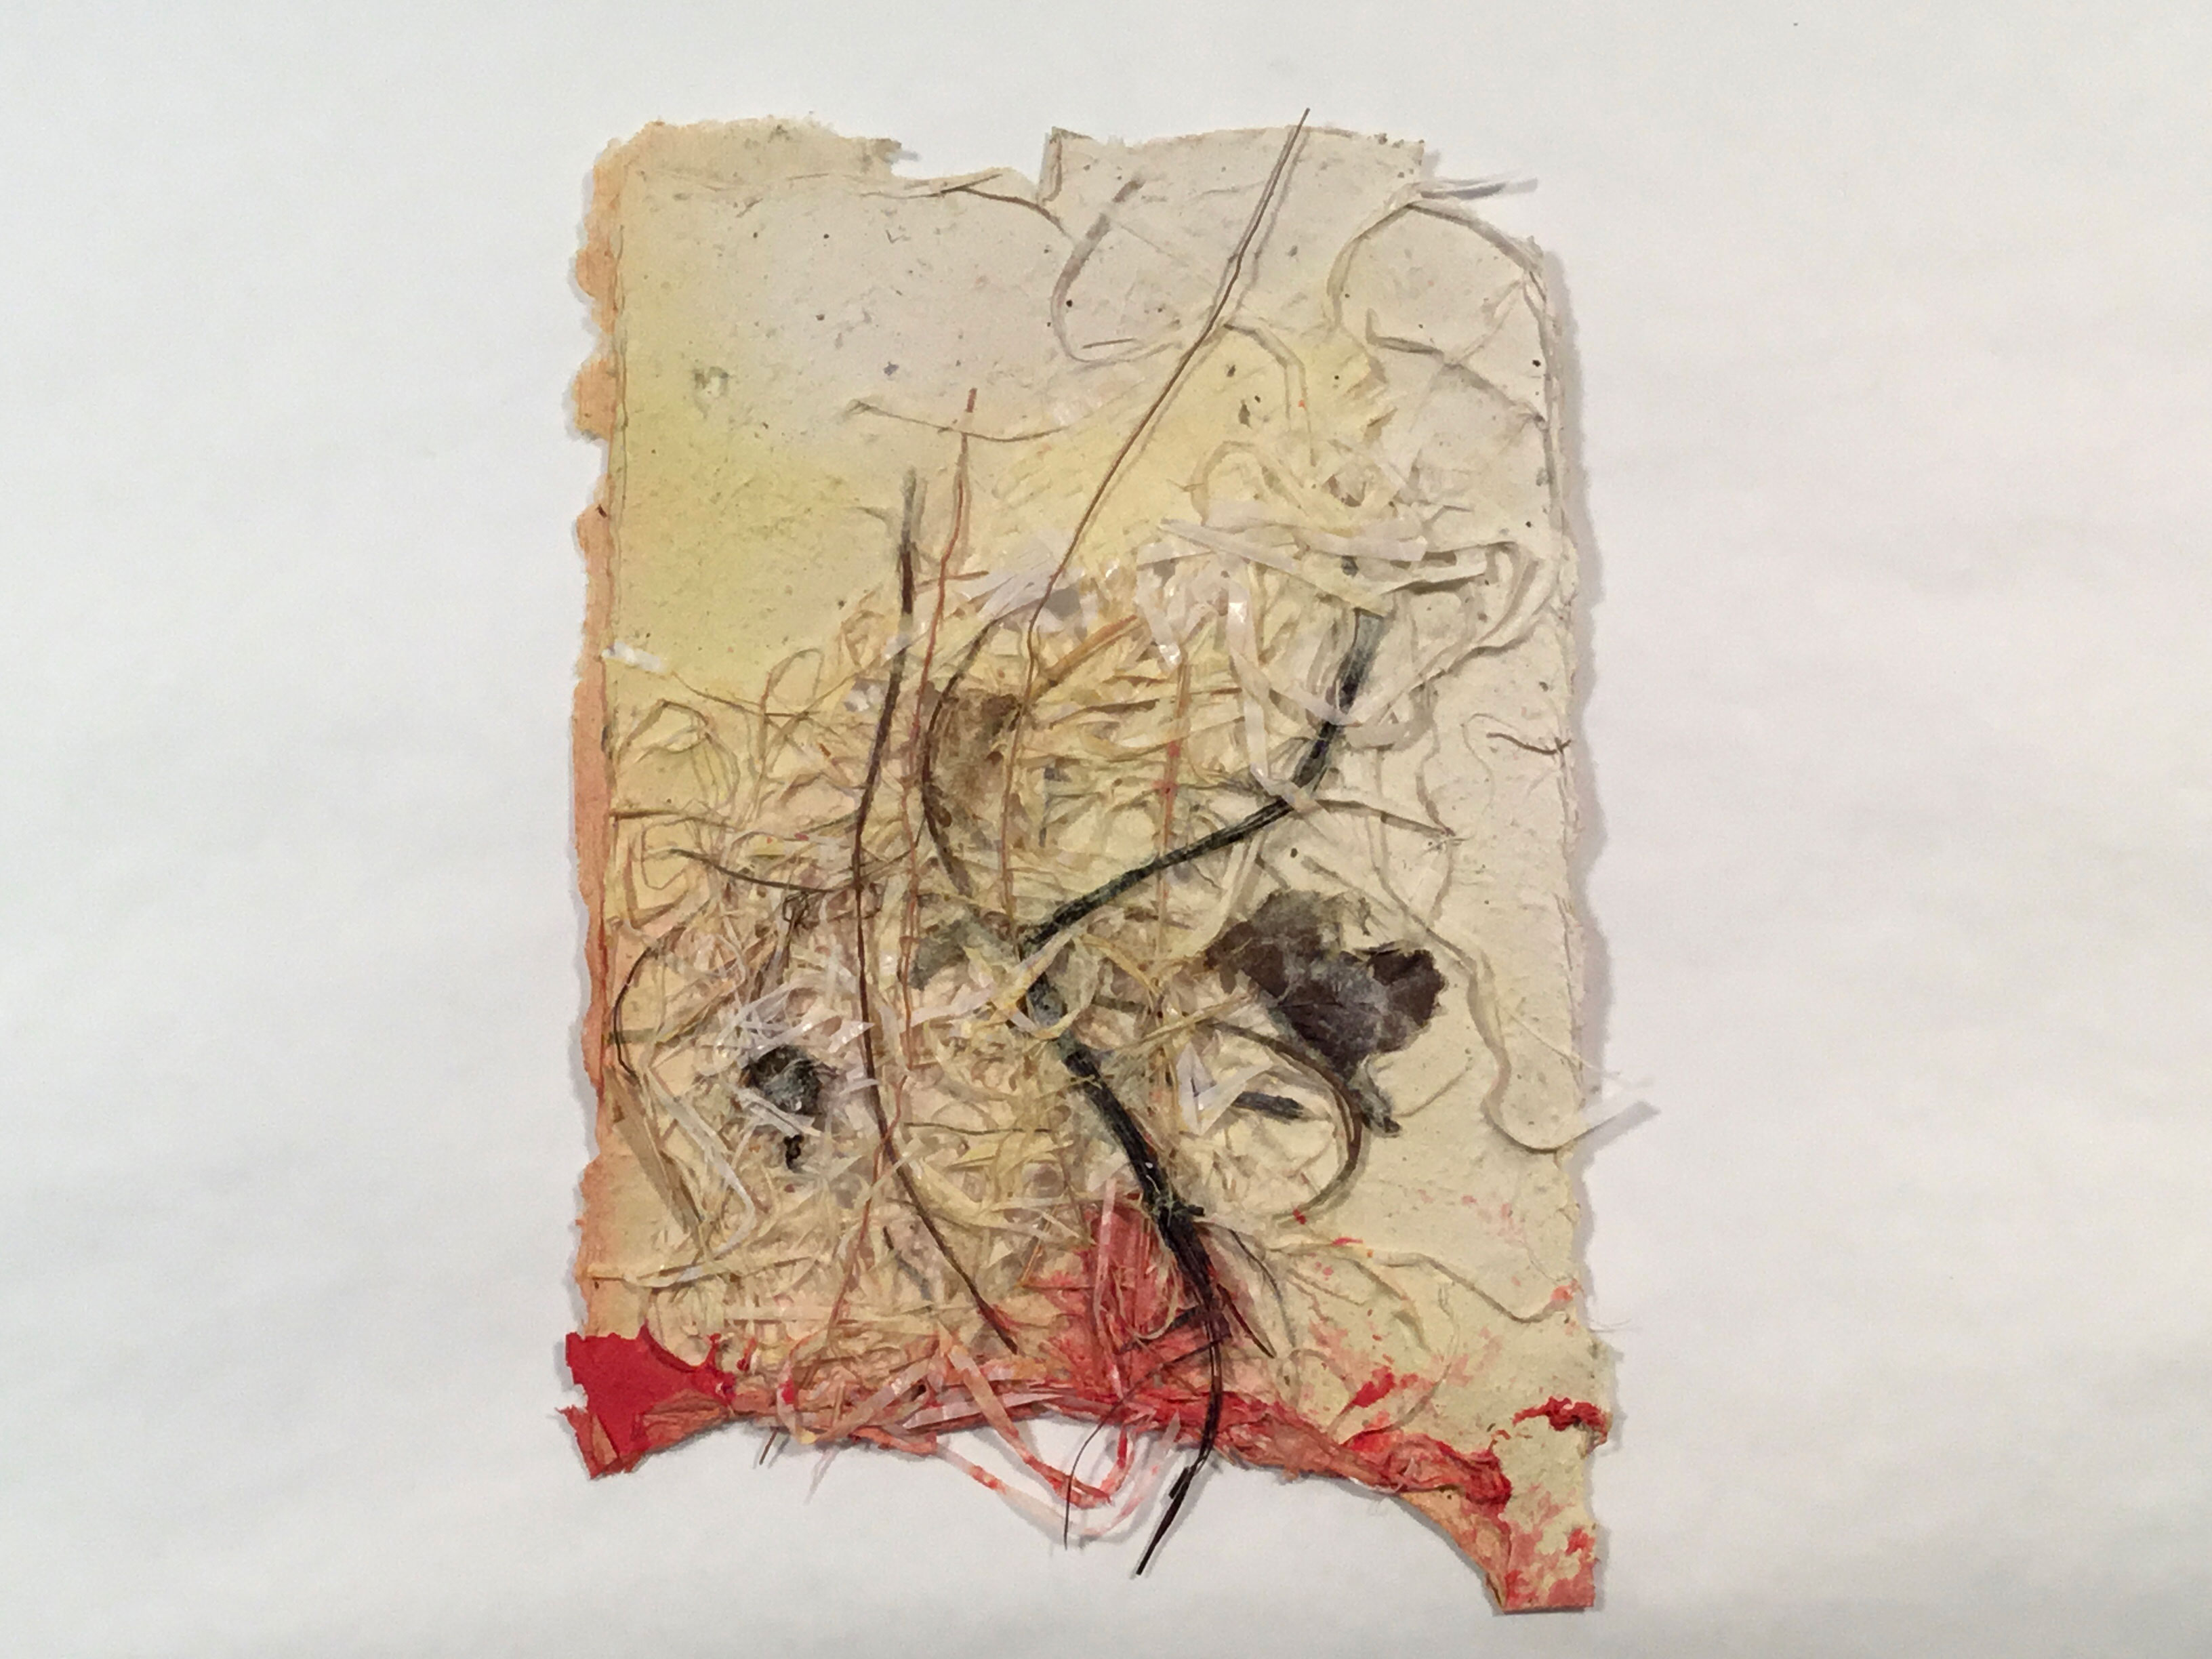 A light yellow and beige piece of paper with deckled edges and scraps of hair, thread, and plastic strings scattered throughout the page. The bottom edge is dyed red.